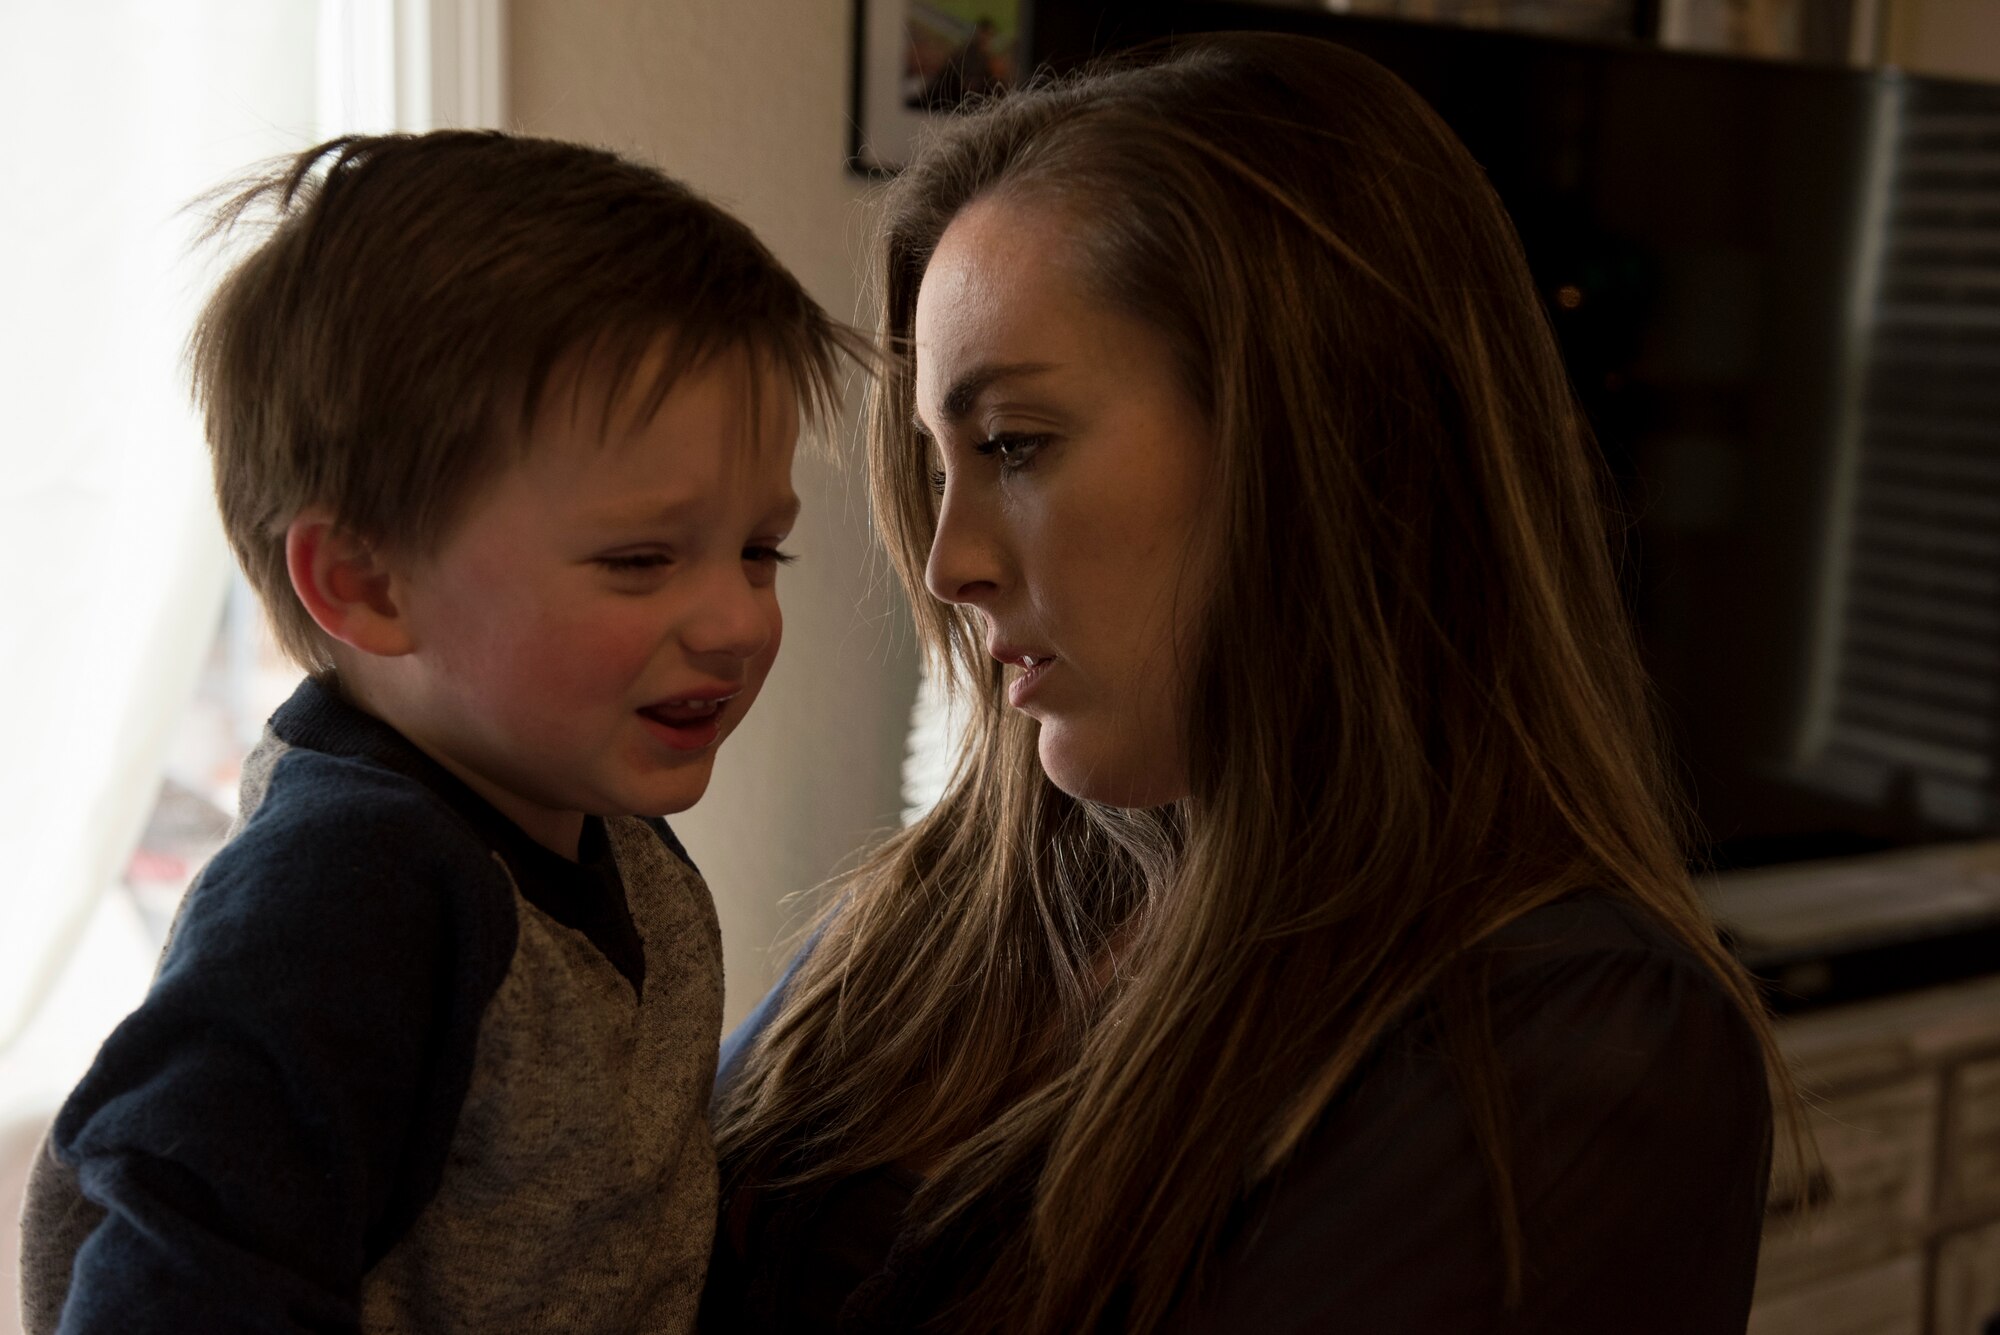 Morgan Noller comforts her son Camden at their home in Vacaville, California, Dec. 5, 2018. Noller won the 2018 Joan Orr Air Force Spouse of the Year Award. (U.S. Air Force photo by Lan Kim)